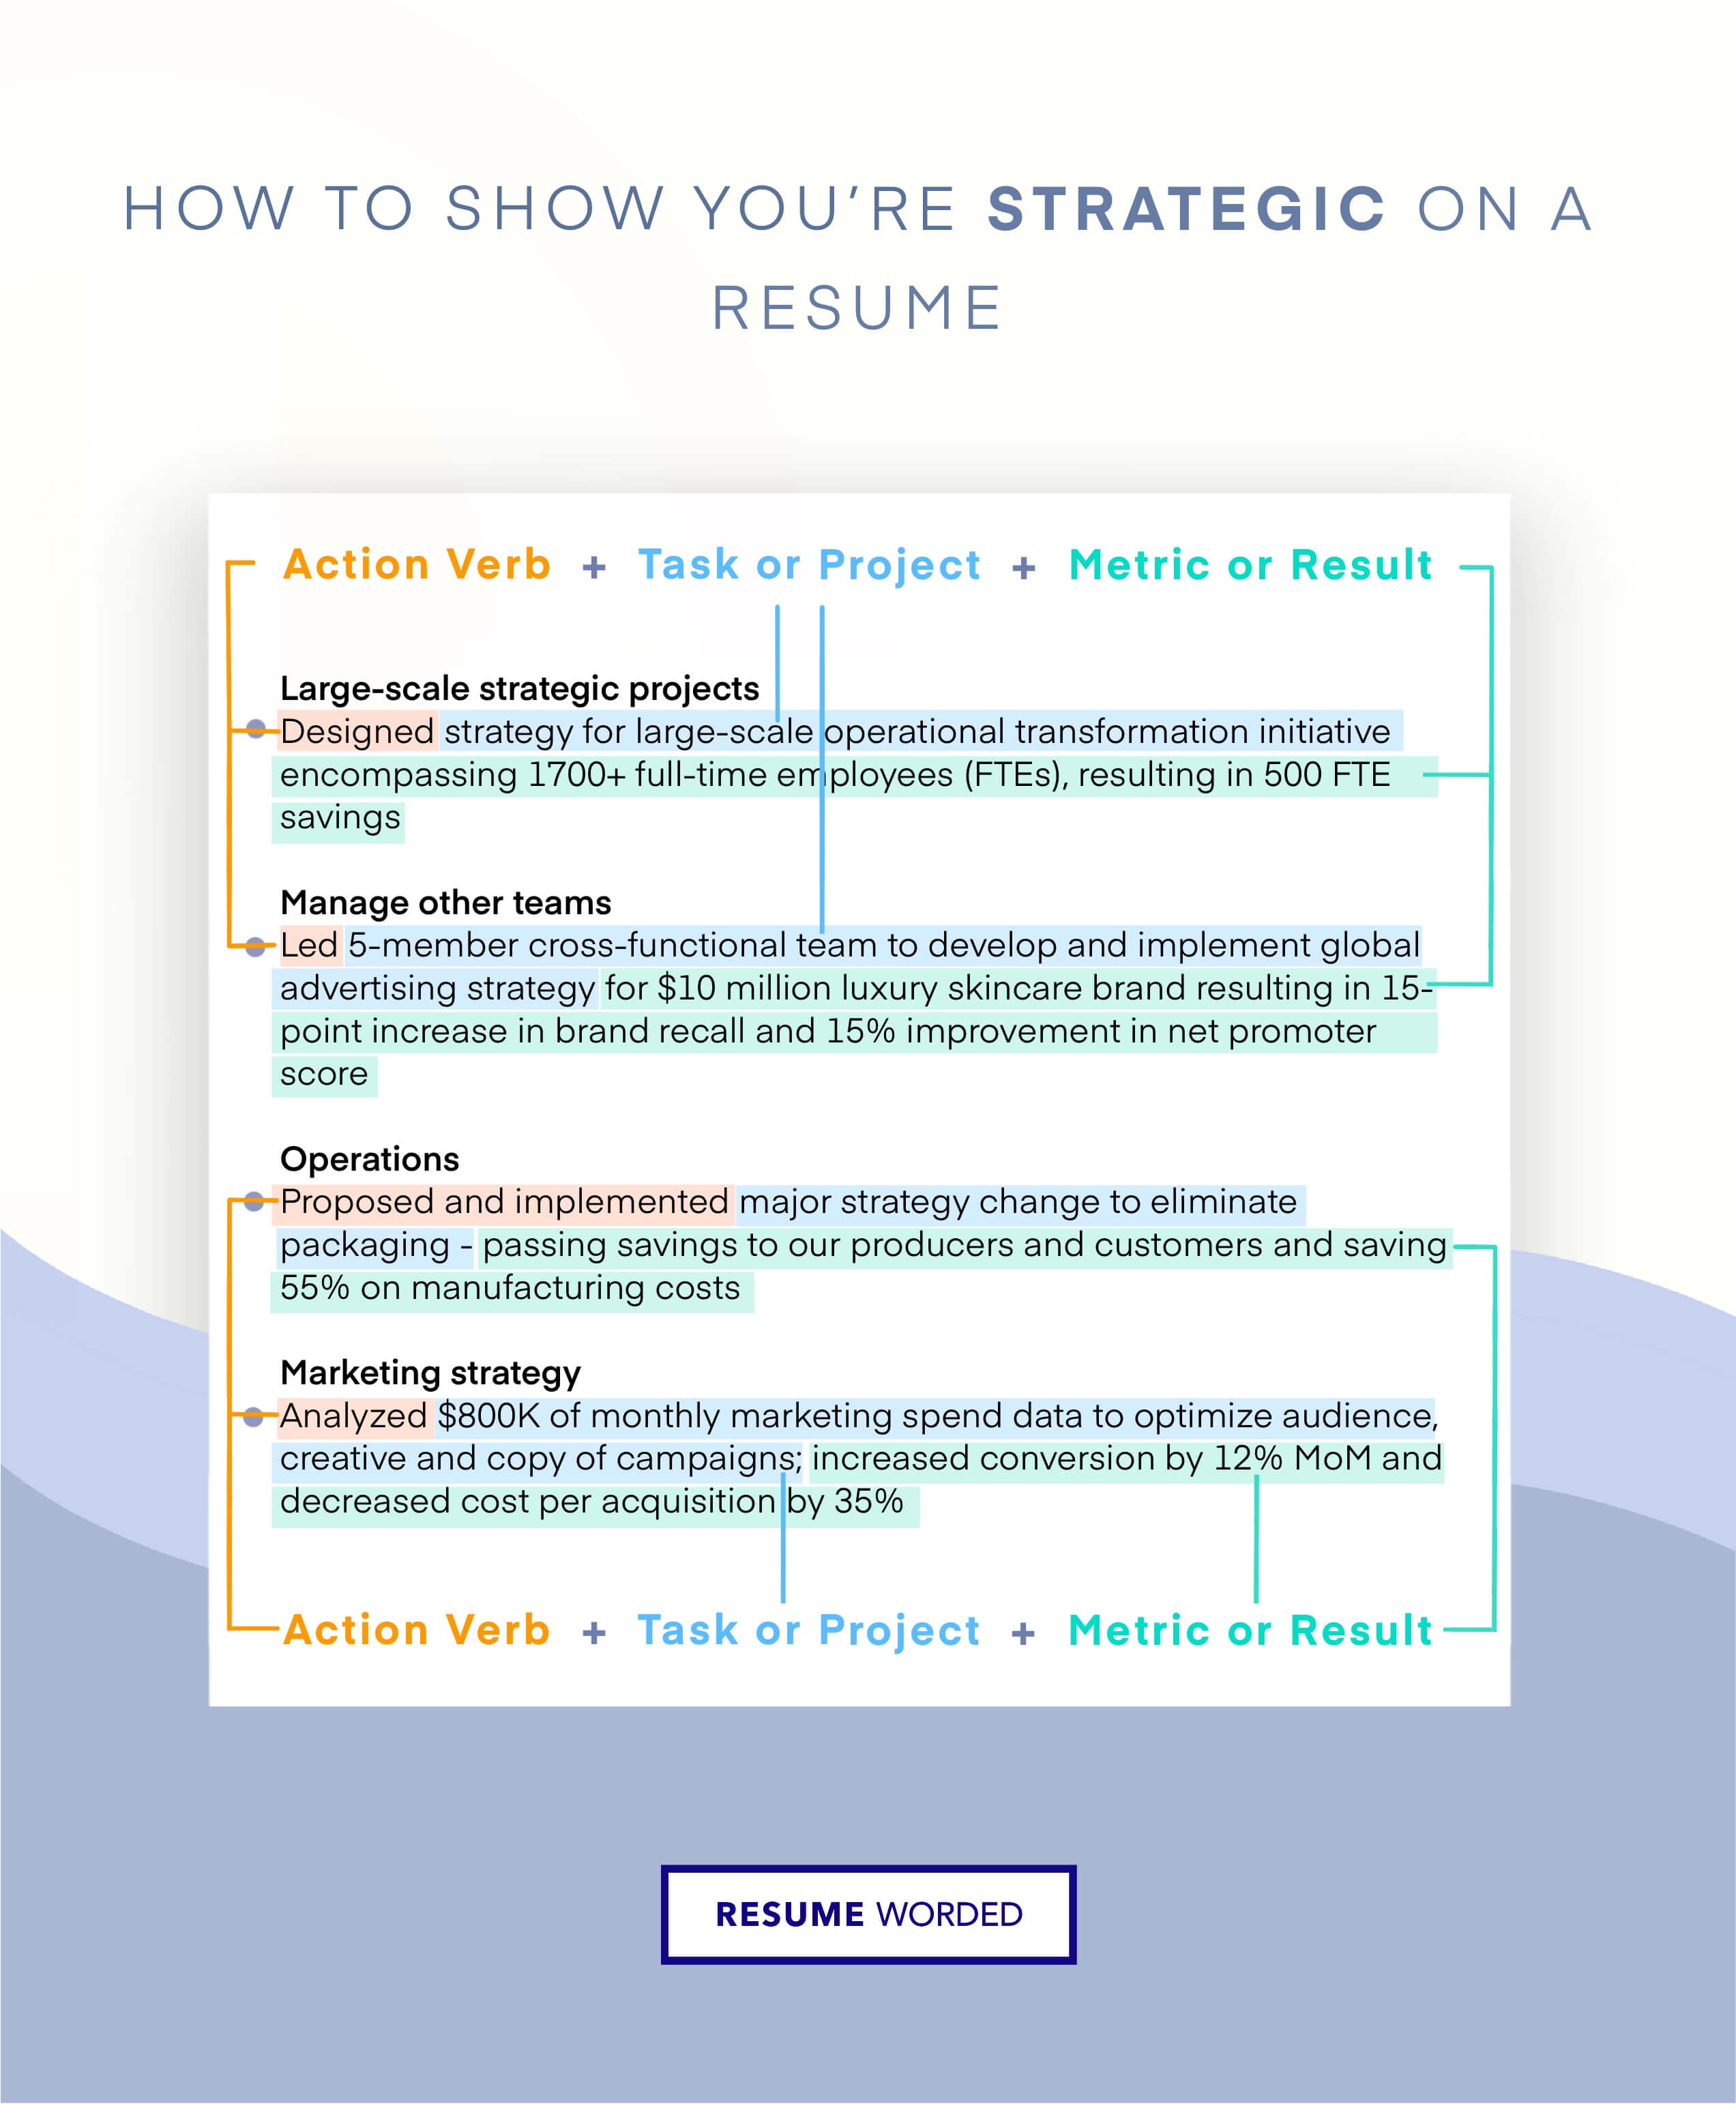 Succinct and informational resume summary in social media strategy - Social Media Strategist Resume